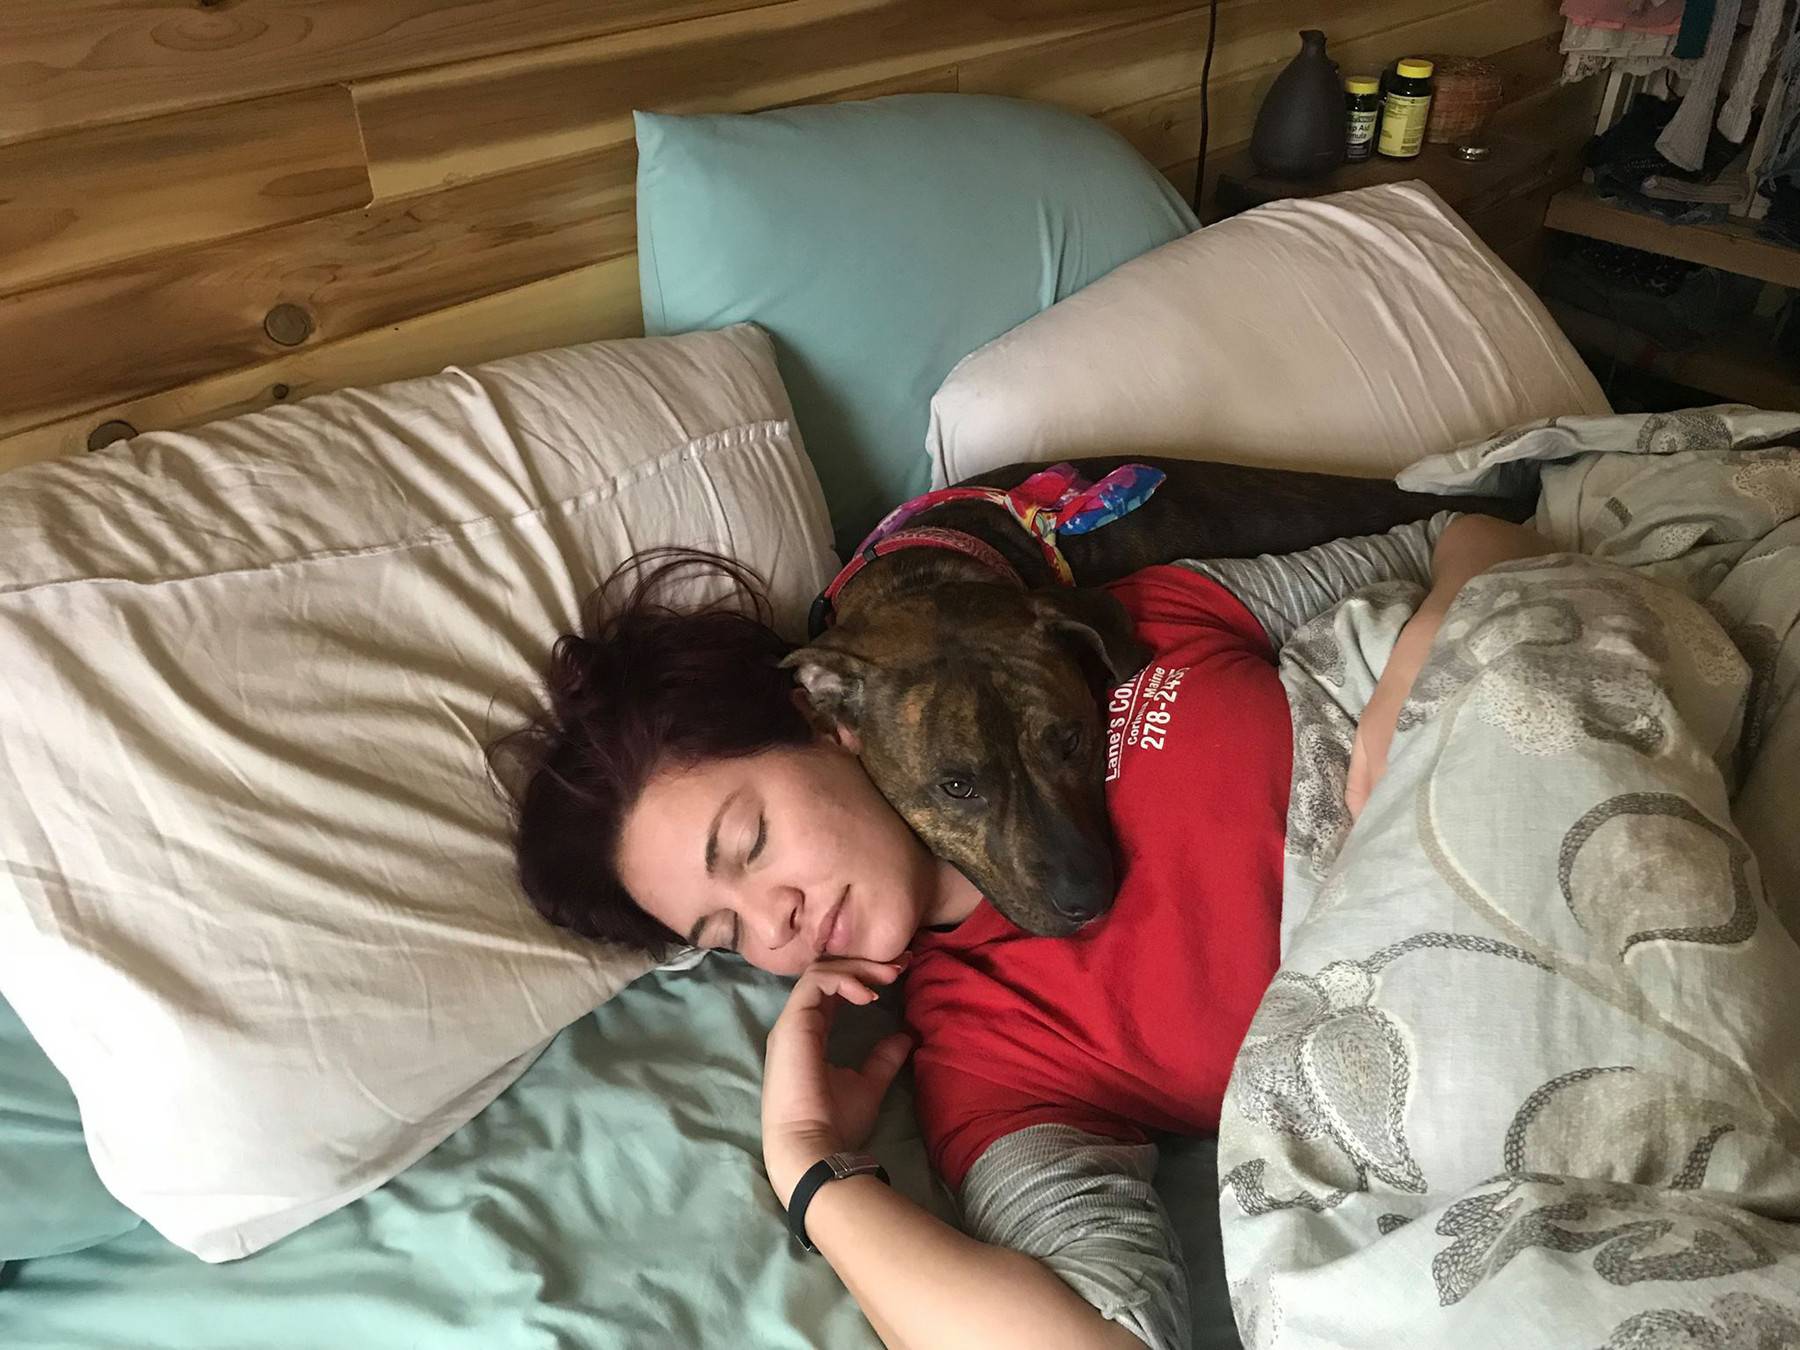 AMA-ZONKED OUT! BAKER WITH NARCOLEPSY RECEIVES SURPRISE PACKAGES SHES ORDERED ONLINE IN HER SLEEP - FROM AIR HORNS TO PROM DRESSES